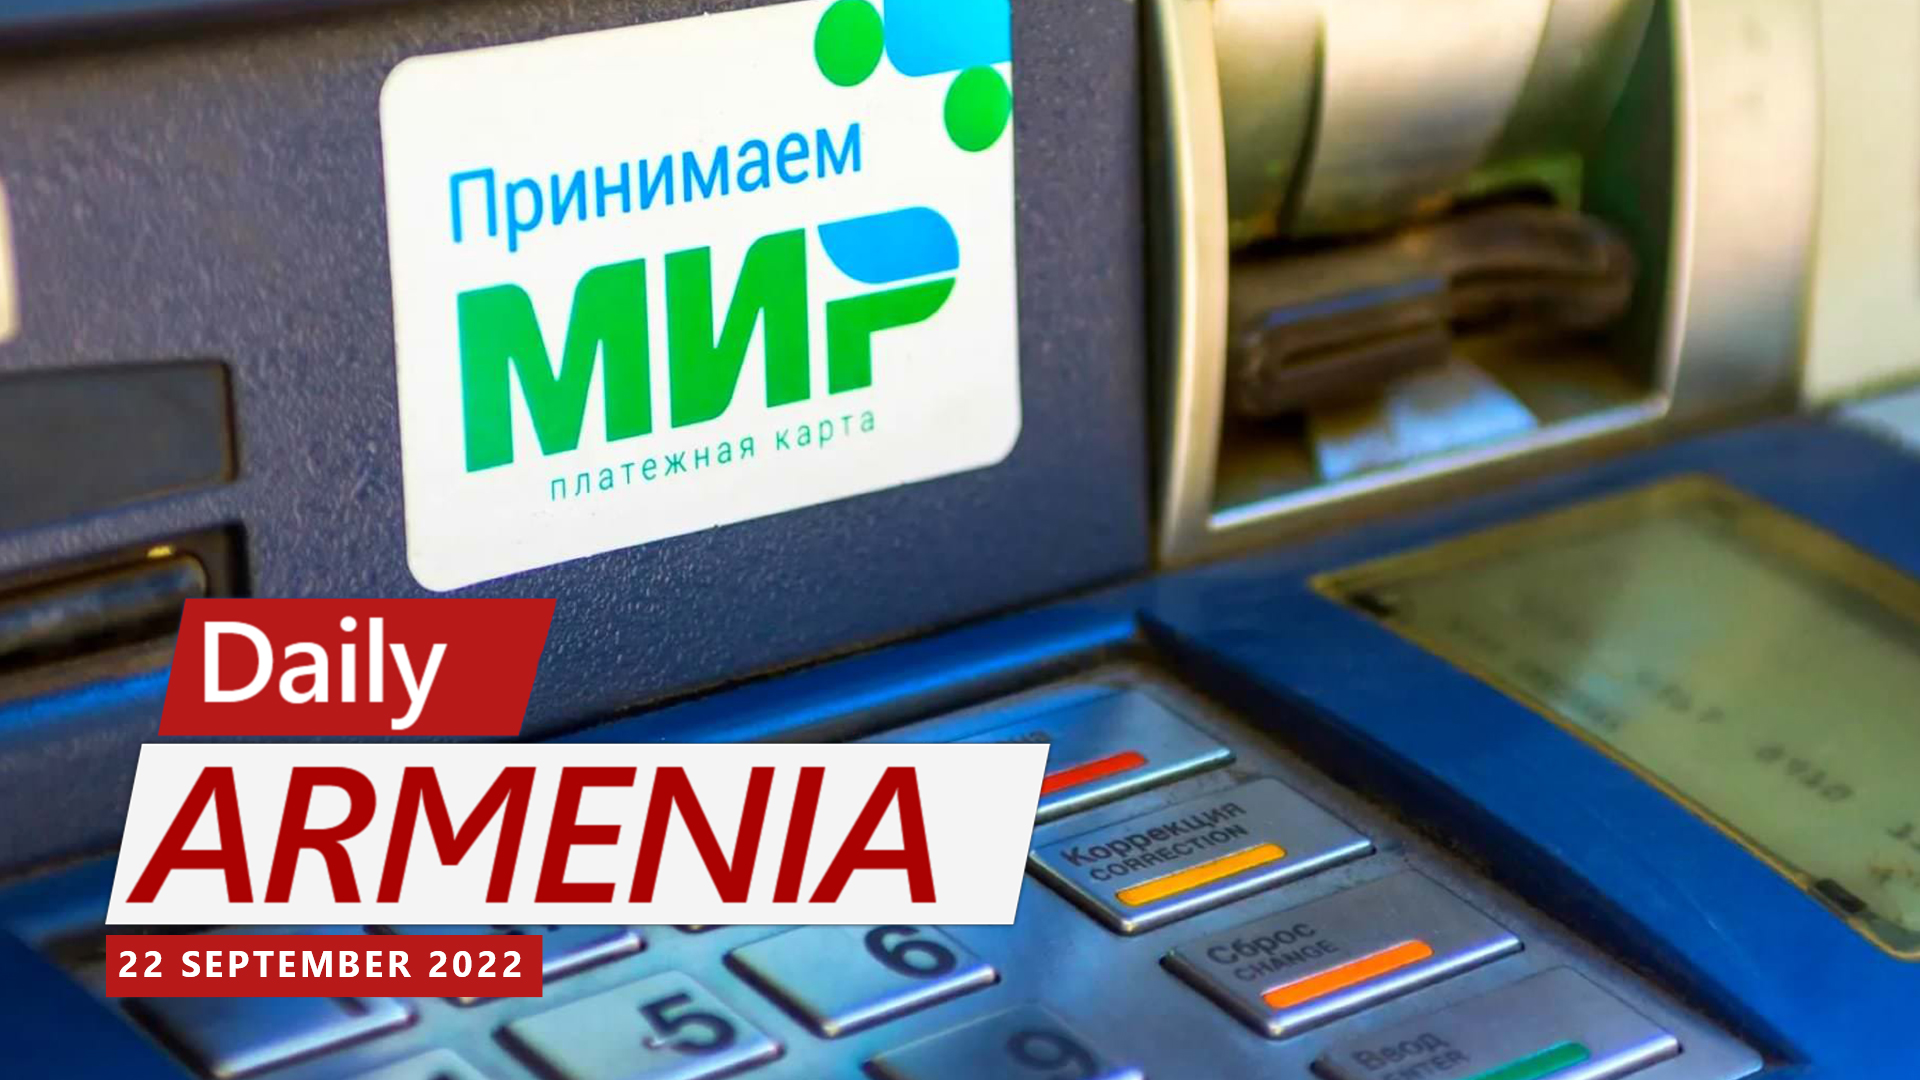 Armenian banks may stop accepting Russia’s Mir payment system